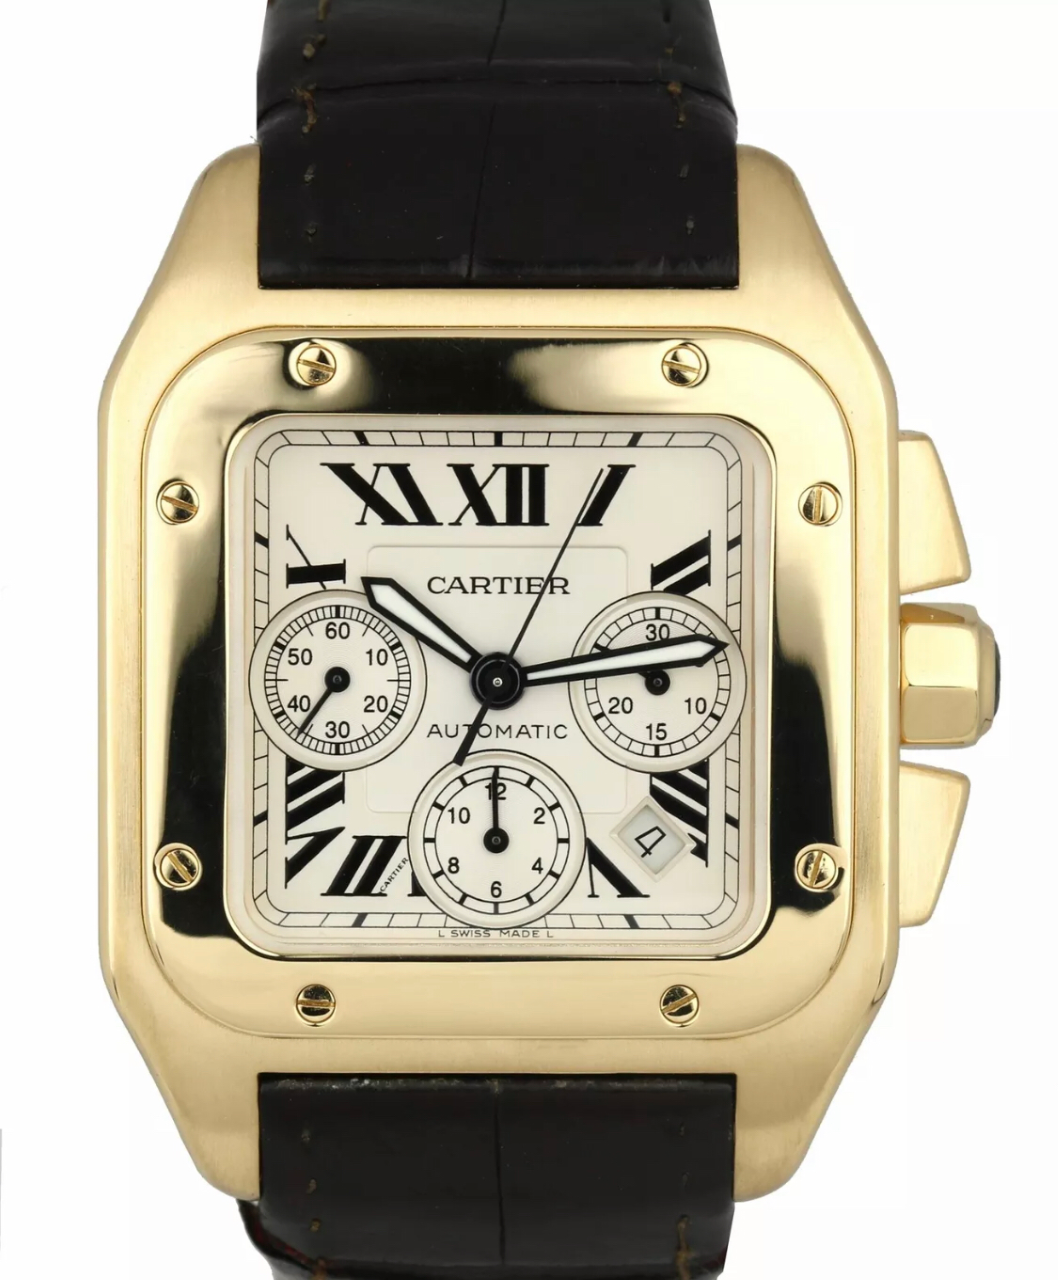 Cartier Chronograph Gold Watch Collectors Coins & Jewelry Lynbrook (516)341-7355